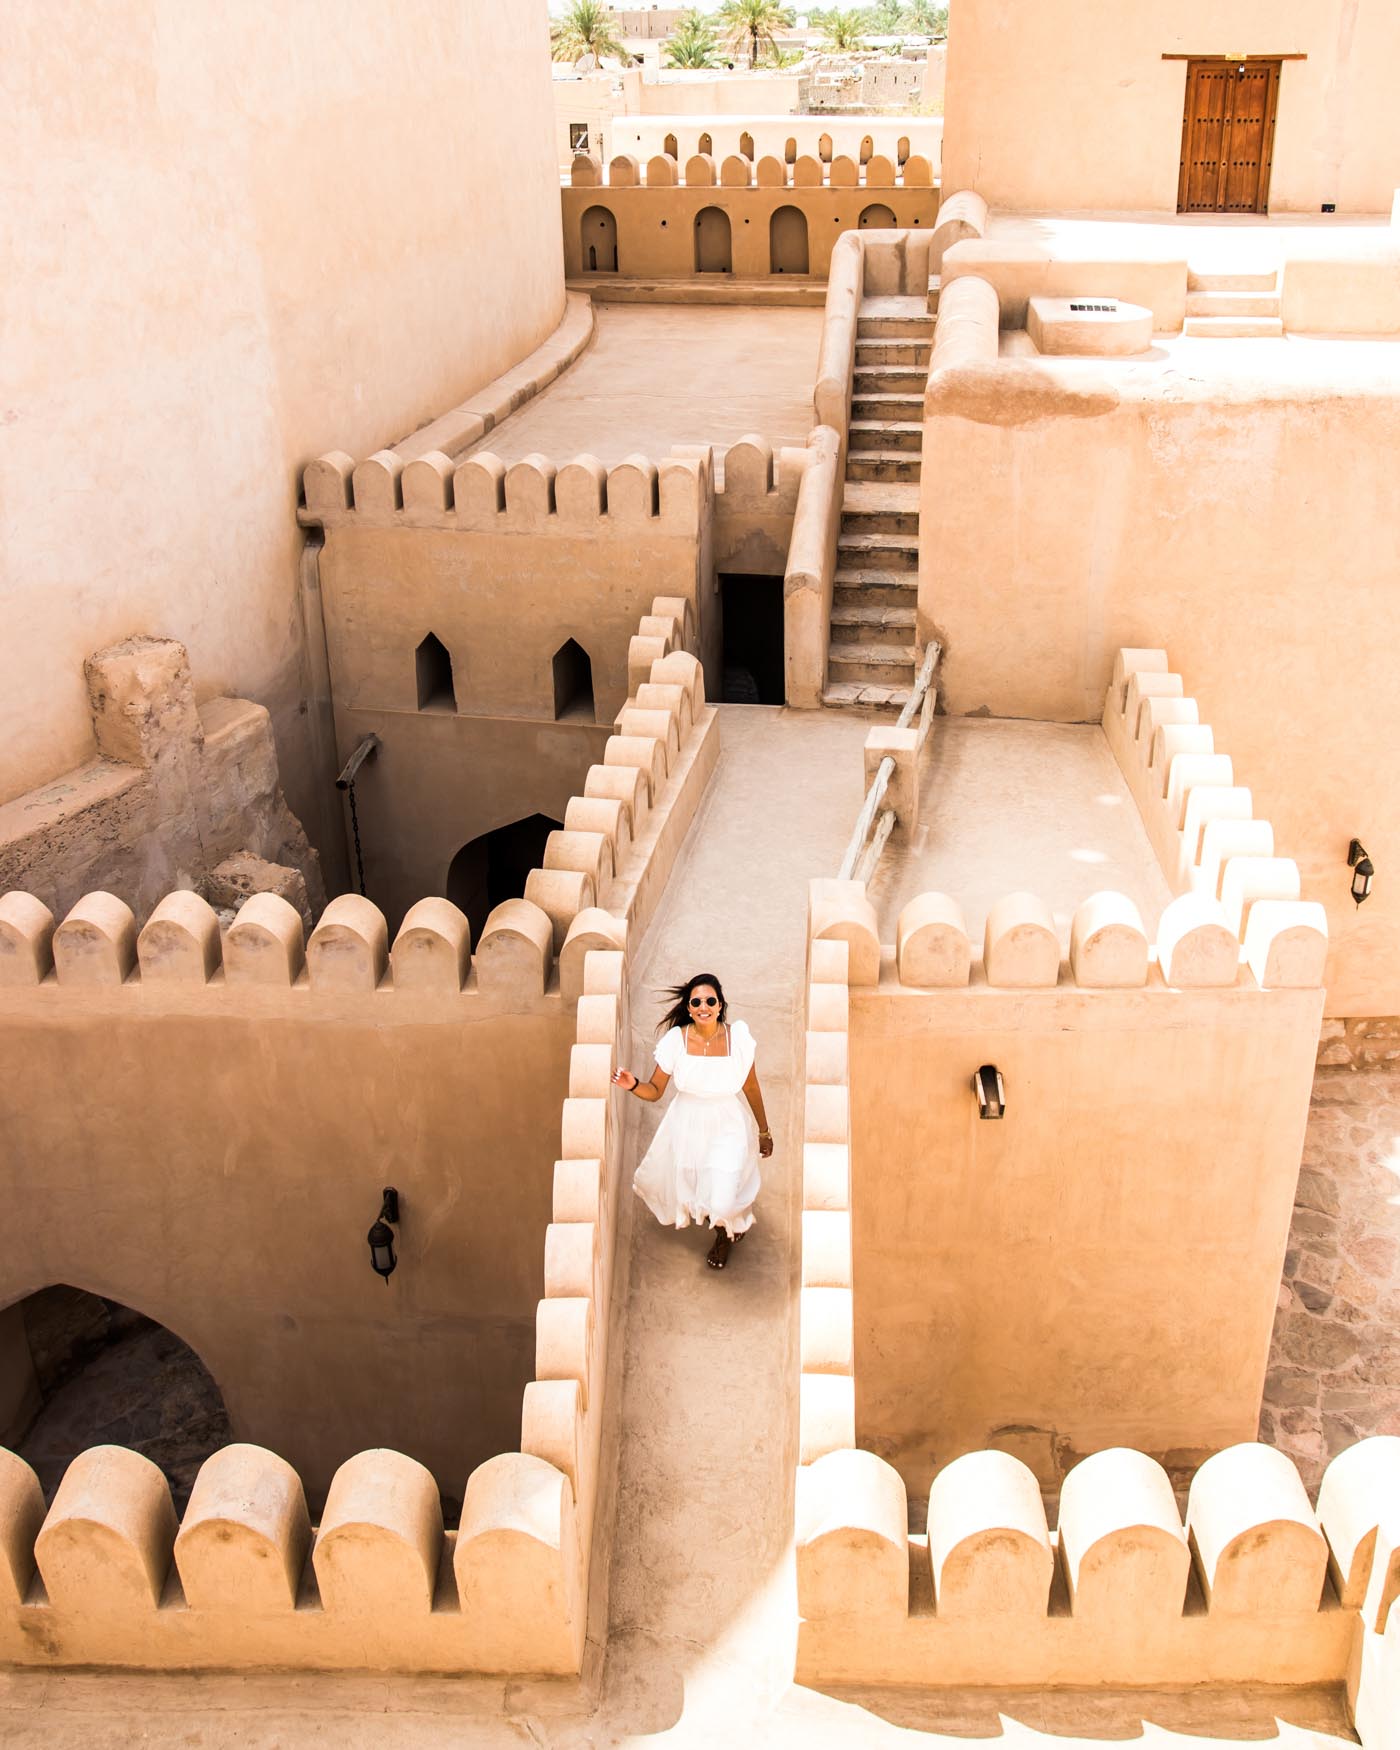 Oman_Muscat_Road_Trip_The_Chedi_Five_Star_Middle_East_Luxury_Hotel_Resort_Spa_Travel_Blogger_Indian_Nizwa_Fort_souk